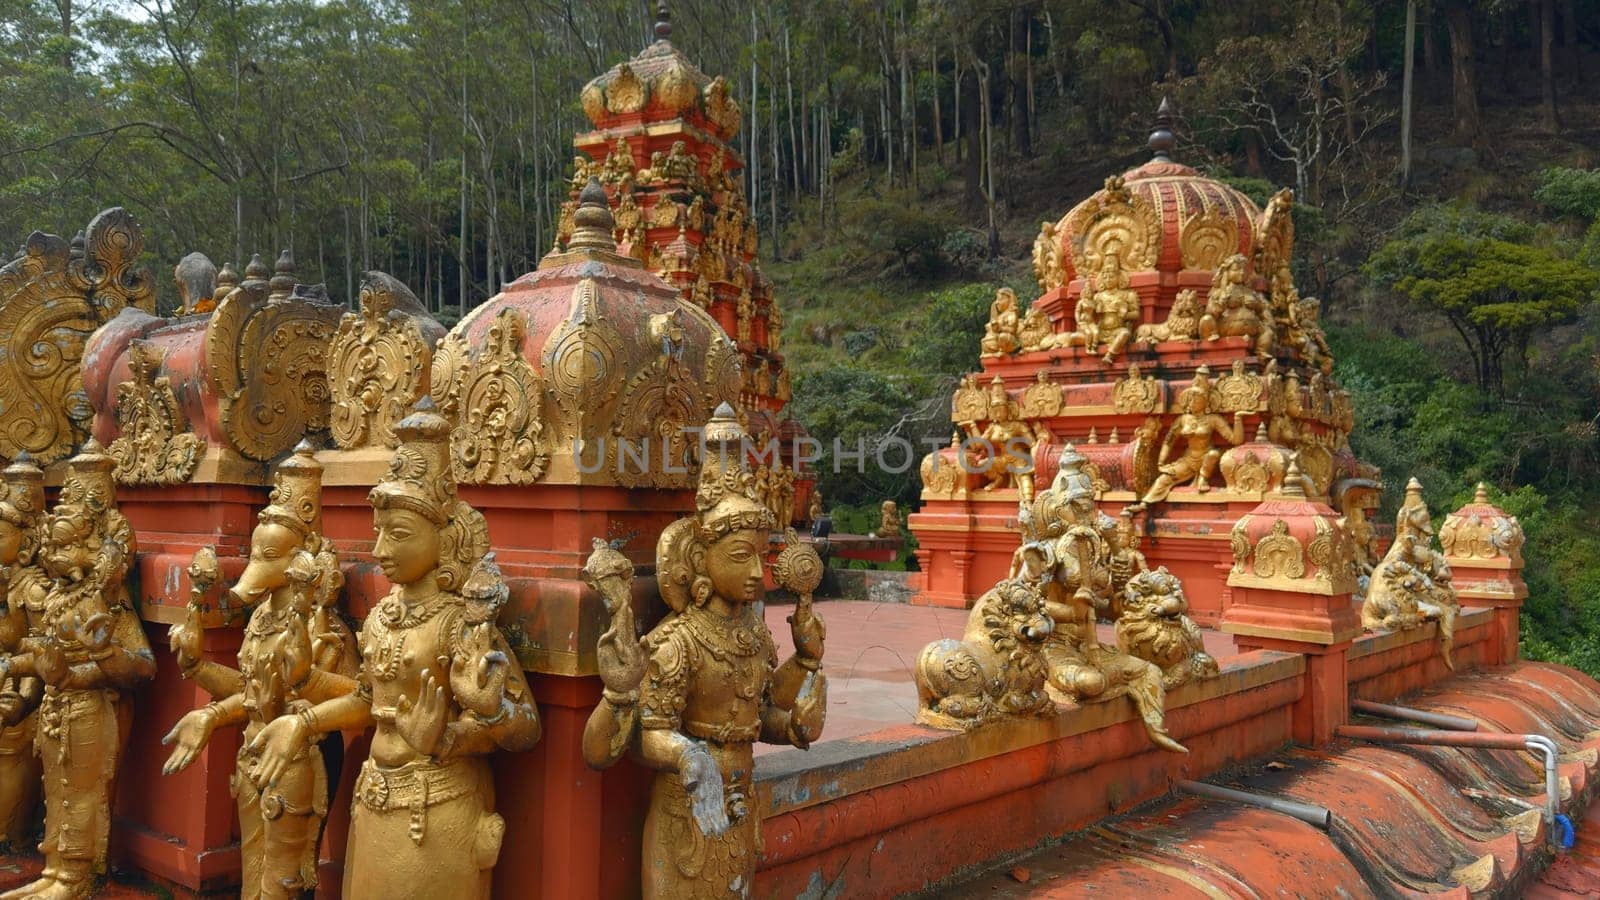 Hindu temple with golden statues. Action. Red temple with golden Buddhist statues. Temple of Hindu origin in Sri Lanka.